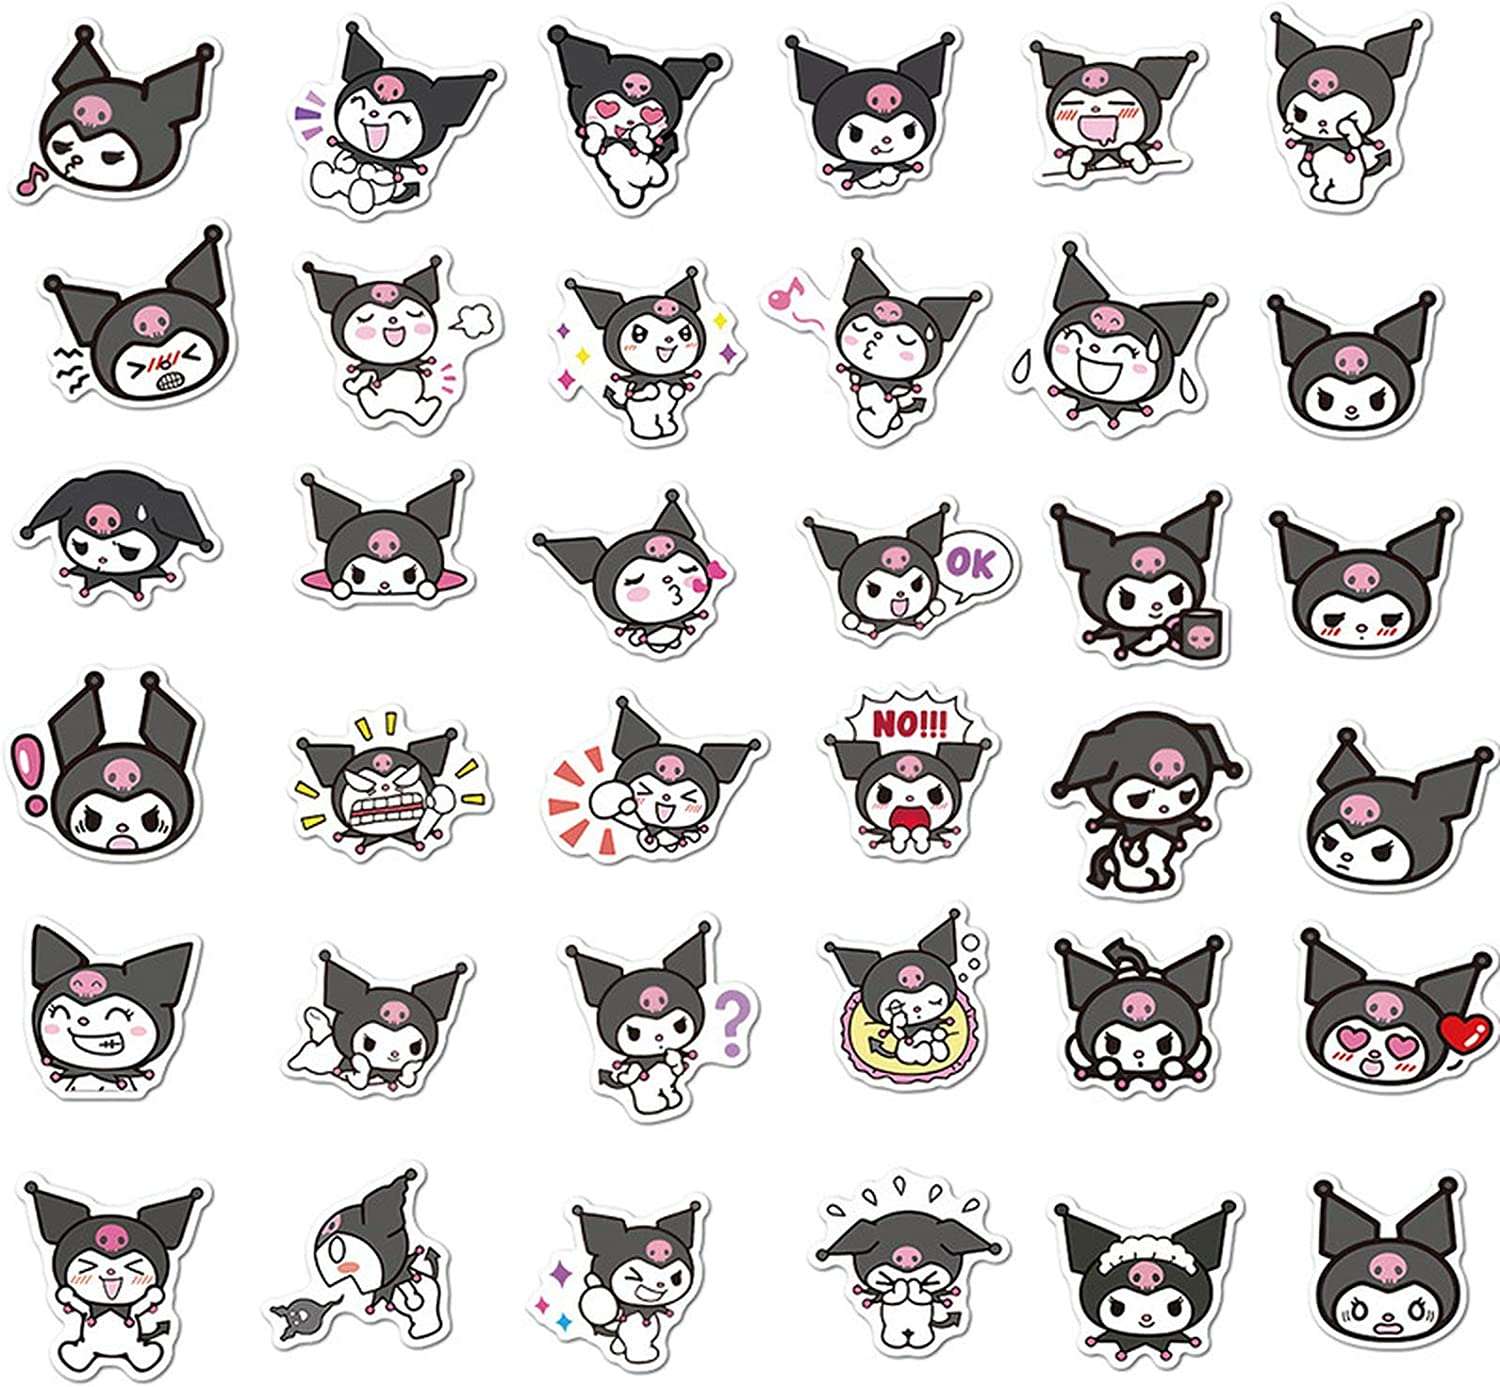 Get Perfect Cute Kuromi Melody Cartoon Stickers Here With A Big